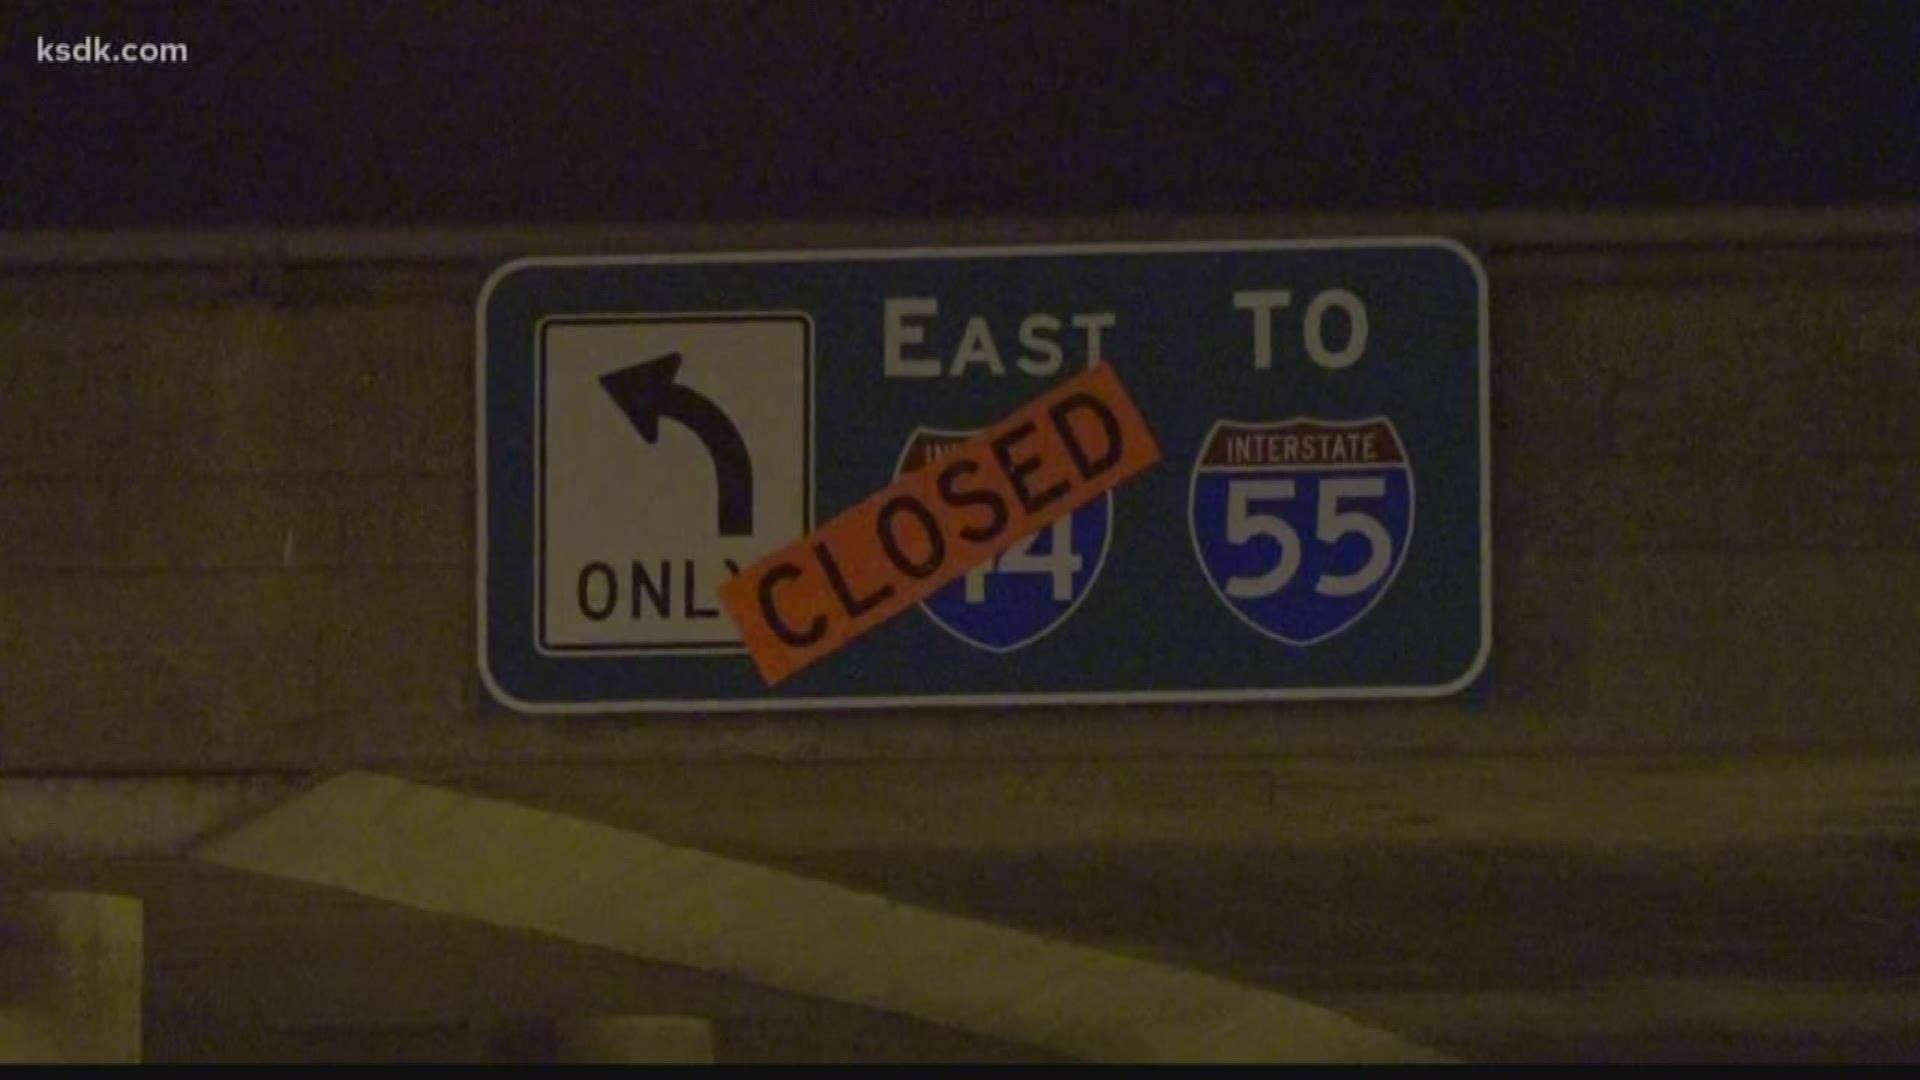 MoDOT will close Jefferson under I-44 this weekend to remove the eastbound bridge over Jefferson